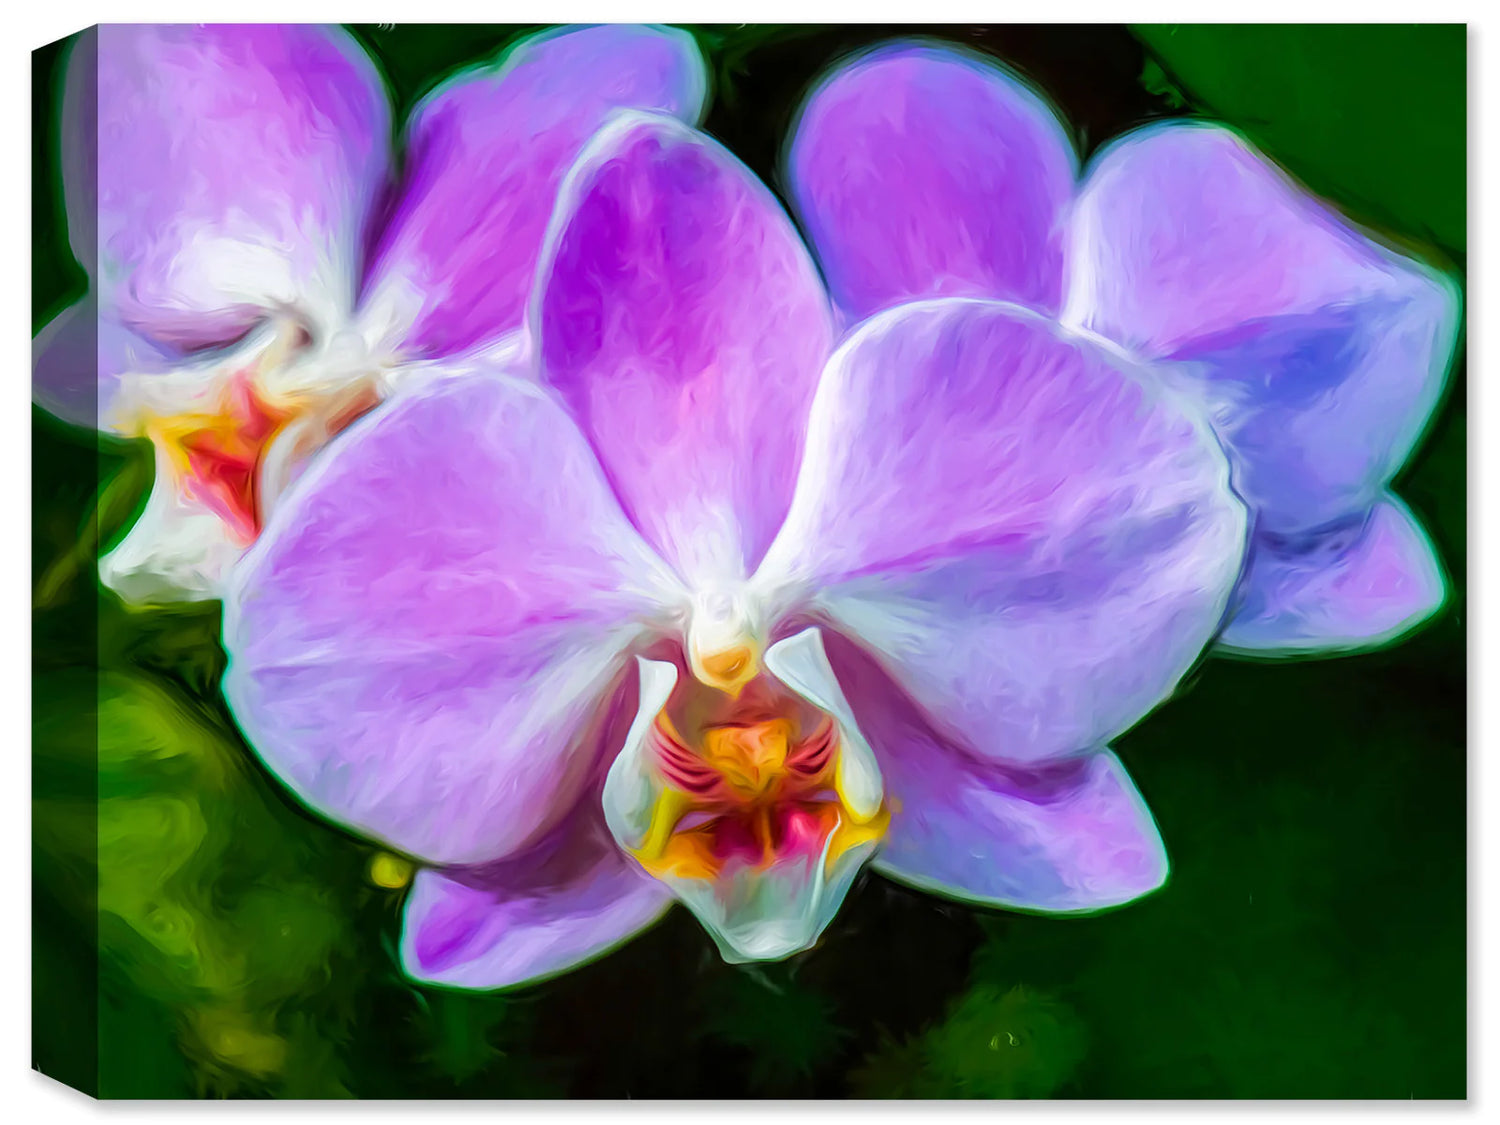 Photographic Floral Images by Ray Huffman